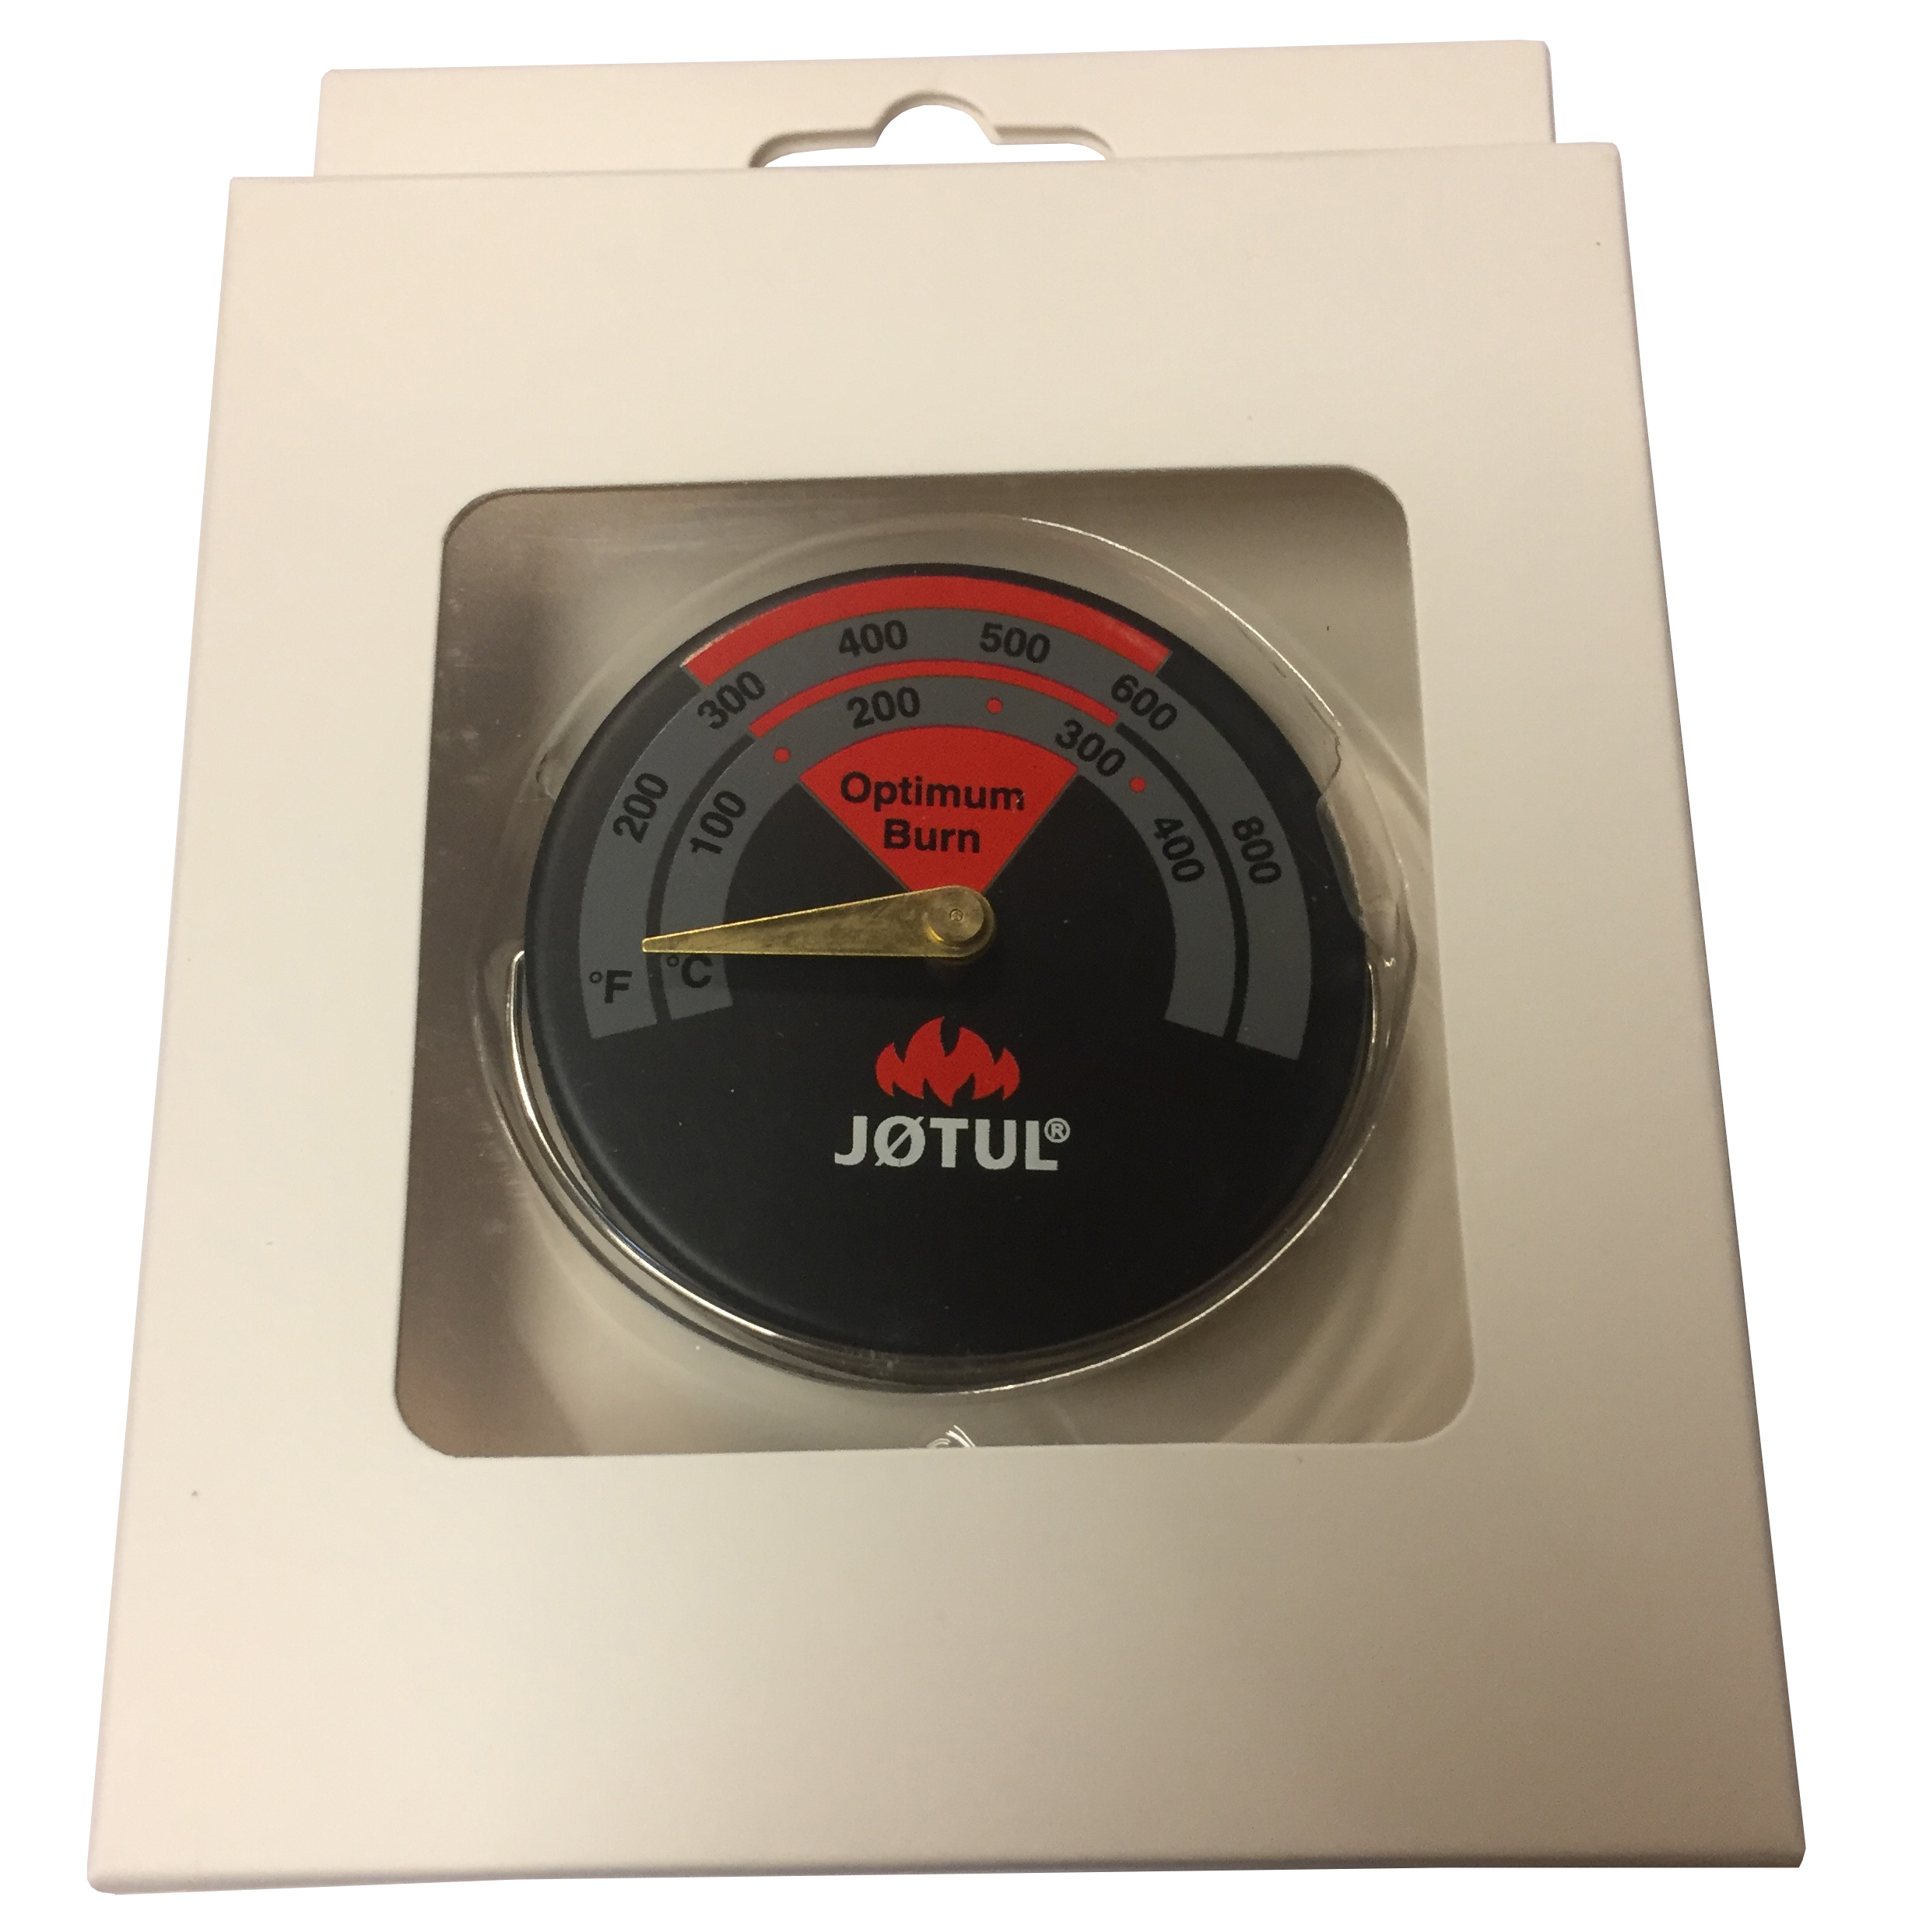 Jotul Wood Stove Magnetic Stove Top Thermometer: 5002